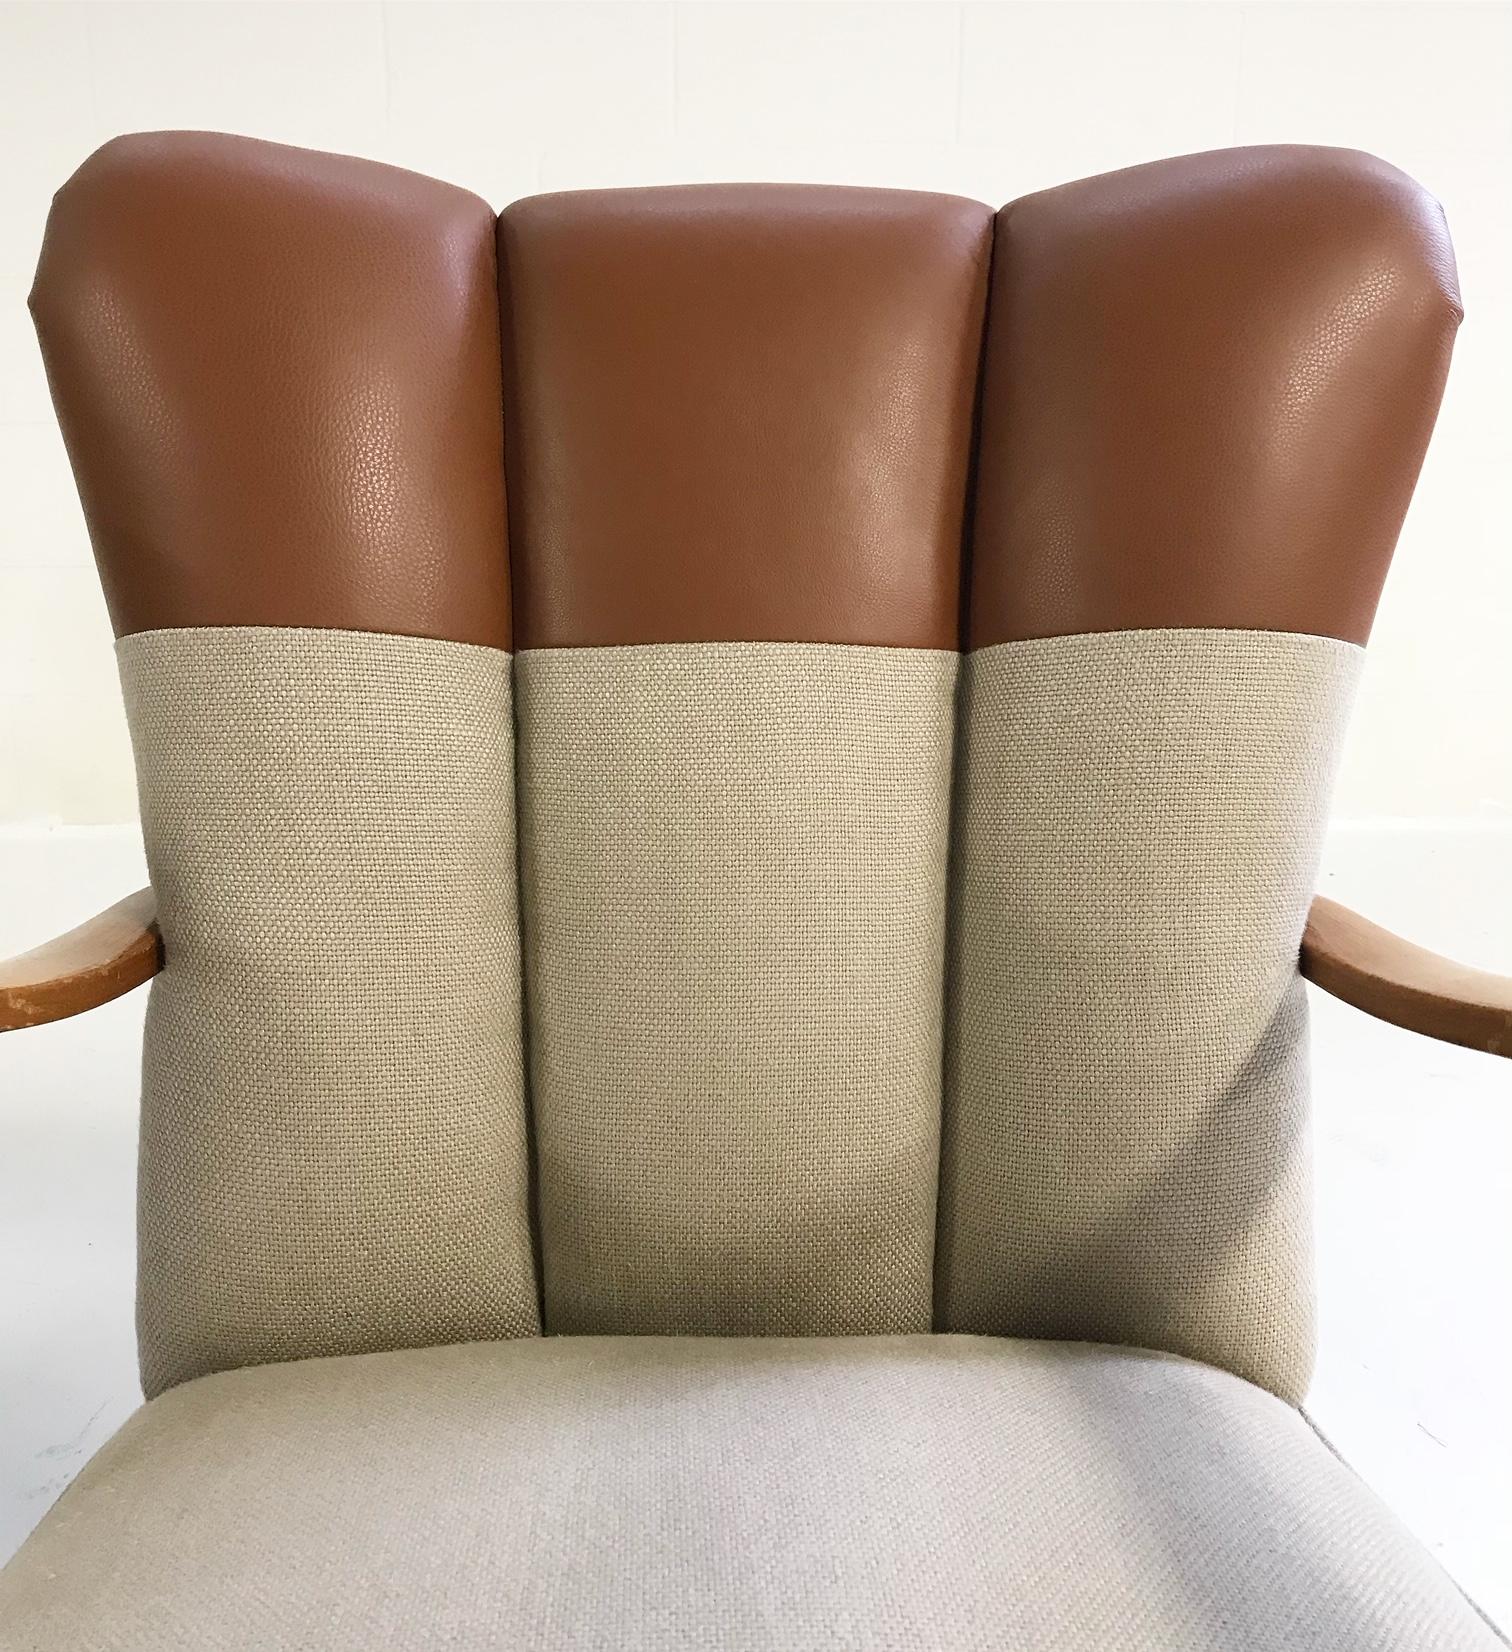 1970s, Italian Bentwood Armchairs Restored in Loro Piana Leather and Linen 1